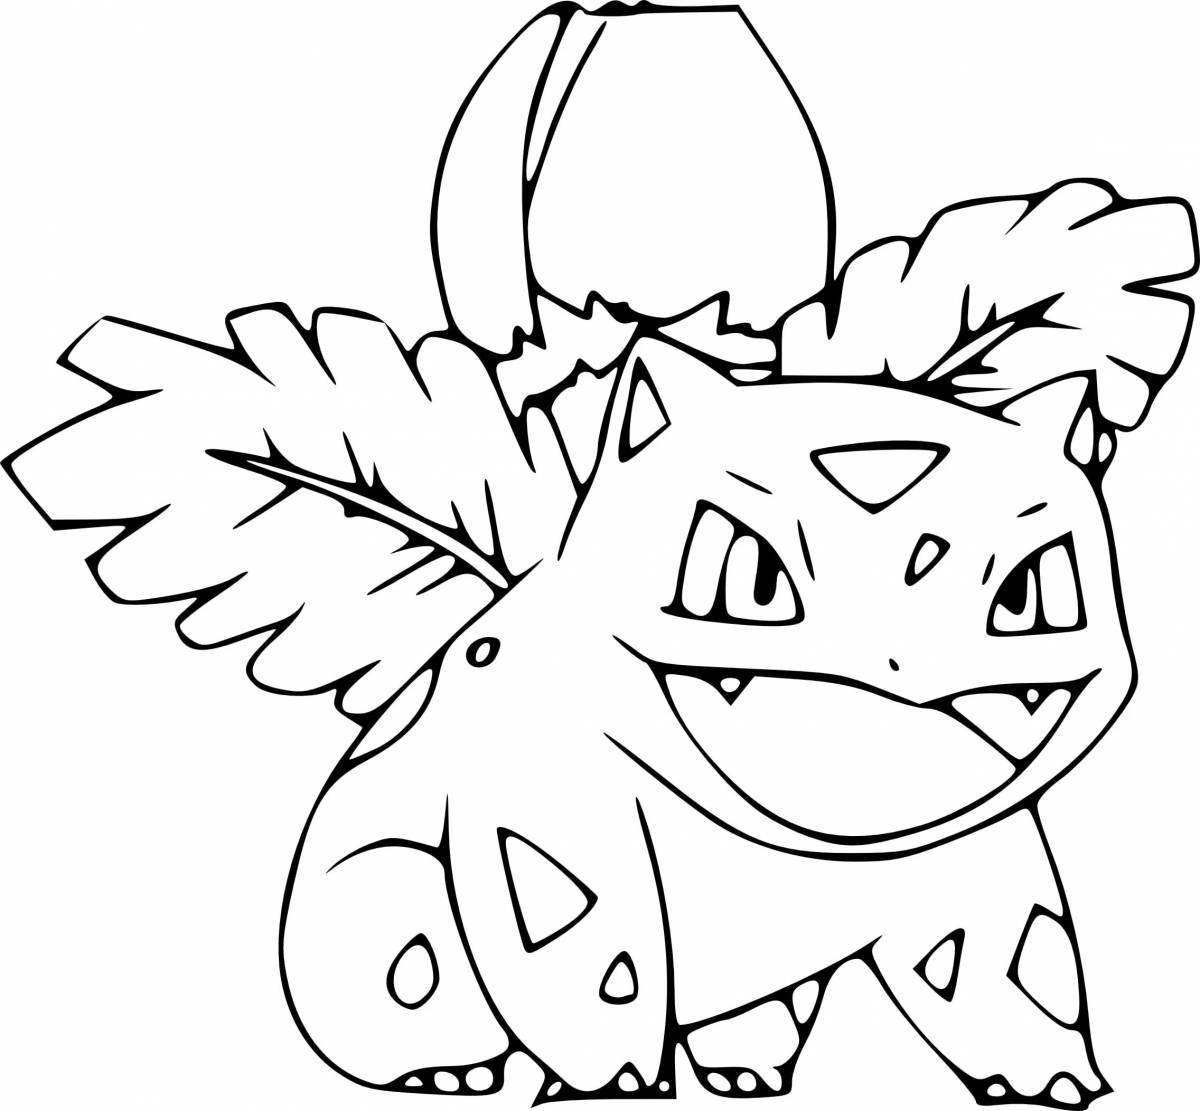 Amazing good quality pokemon coloring page